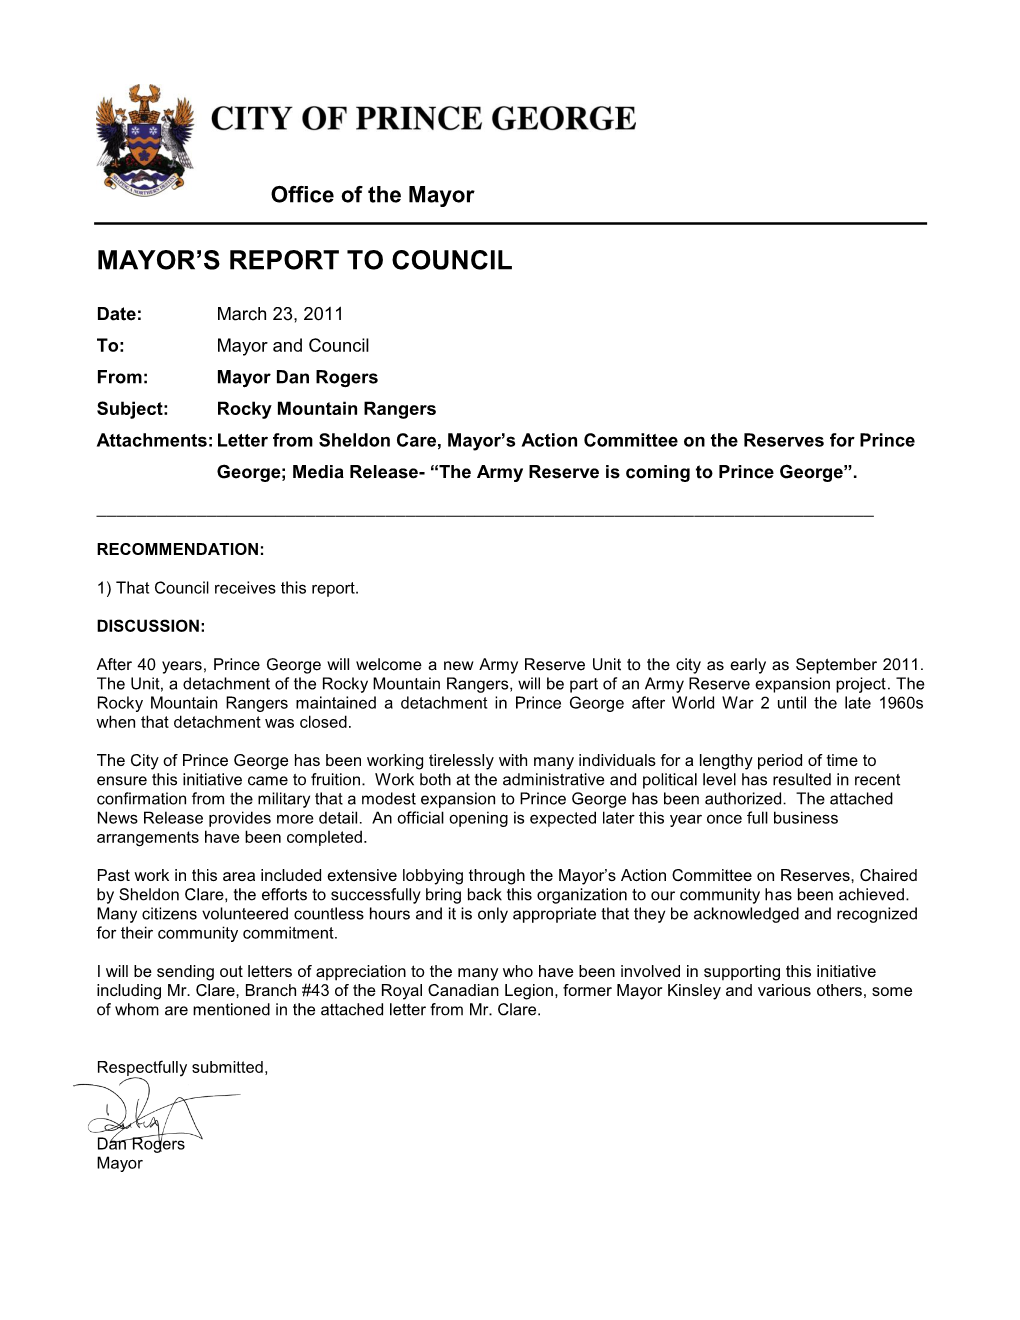 Mayor's Report to Council